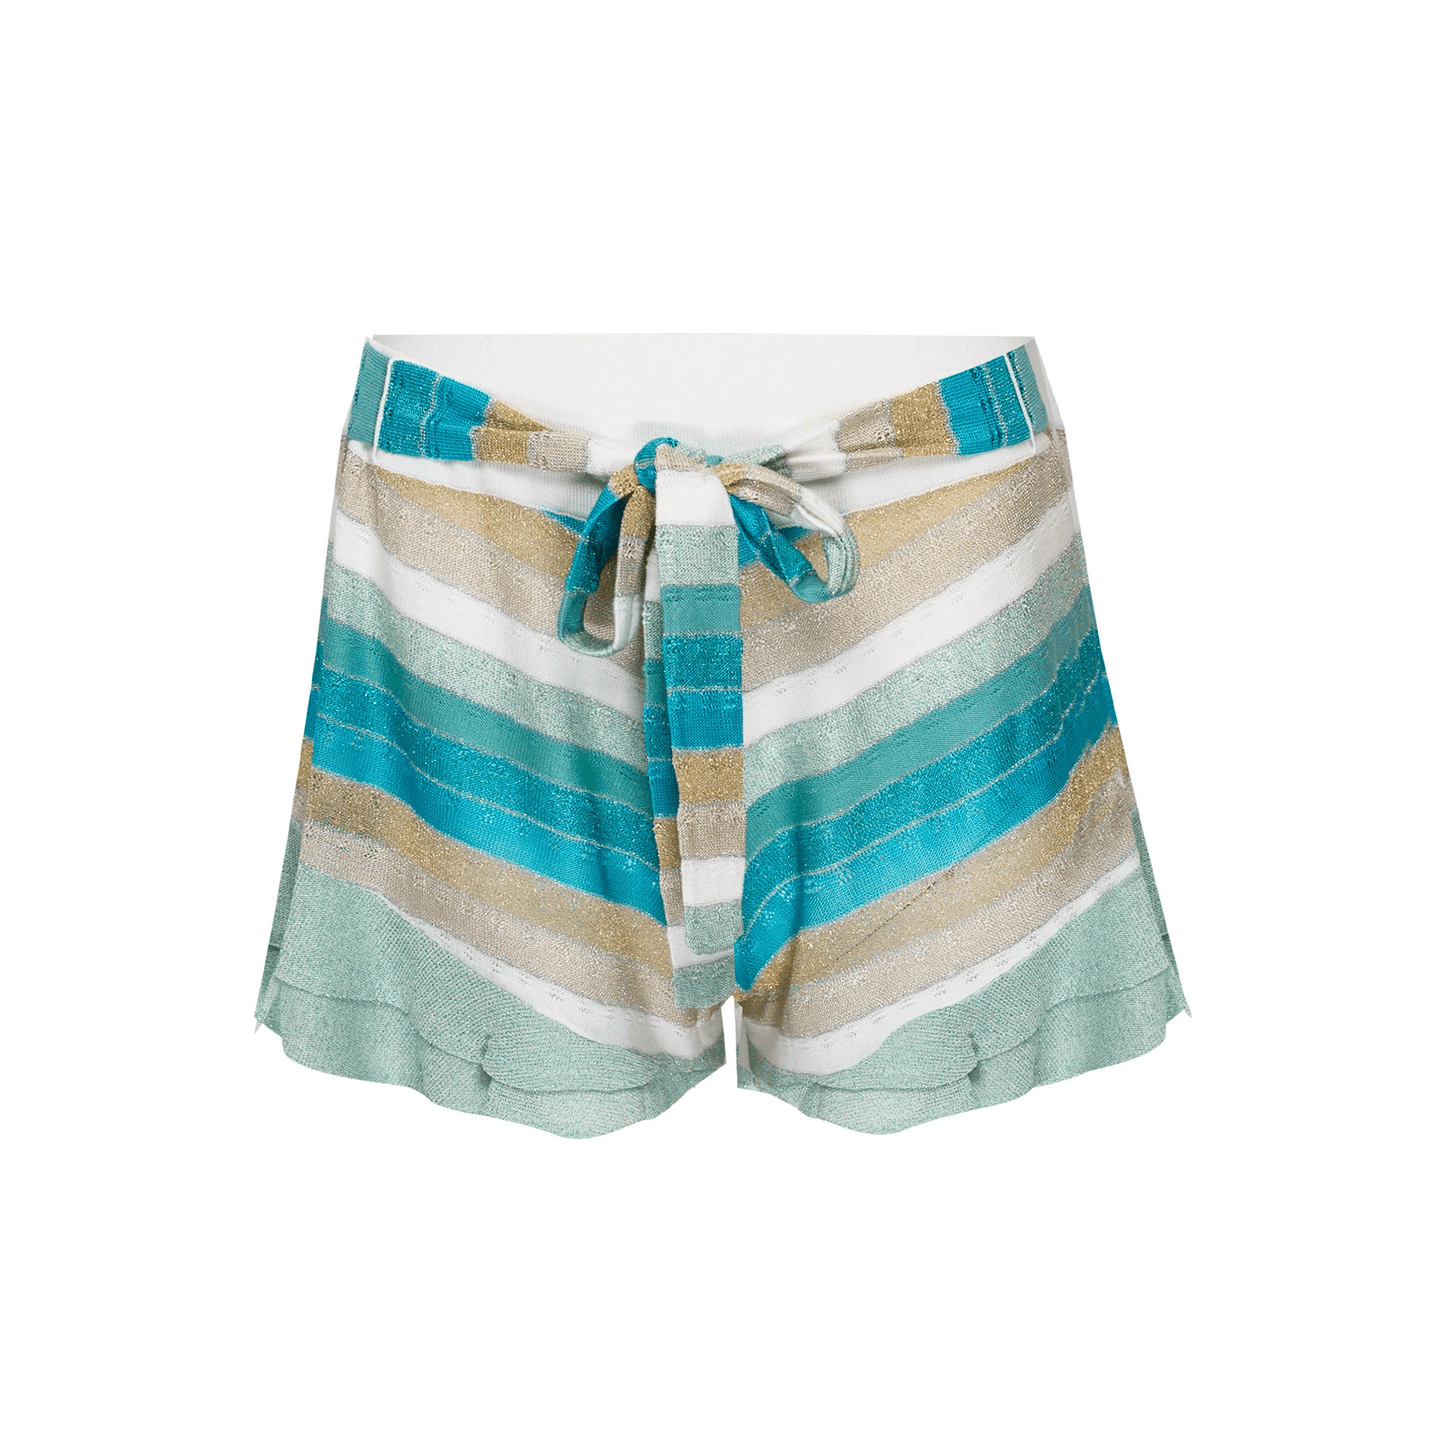 Striped Frill Shorts In Drop Stitch Knit With Front Ties White/MInt